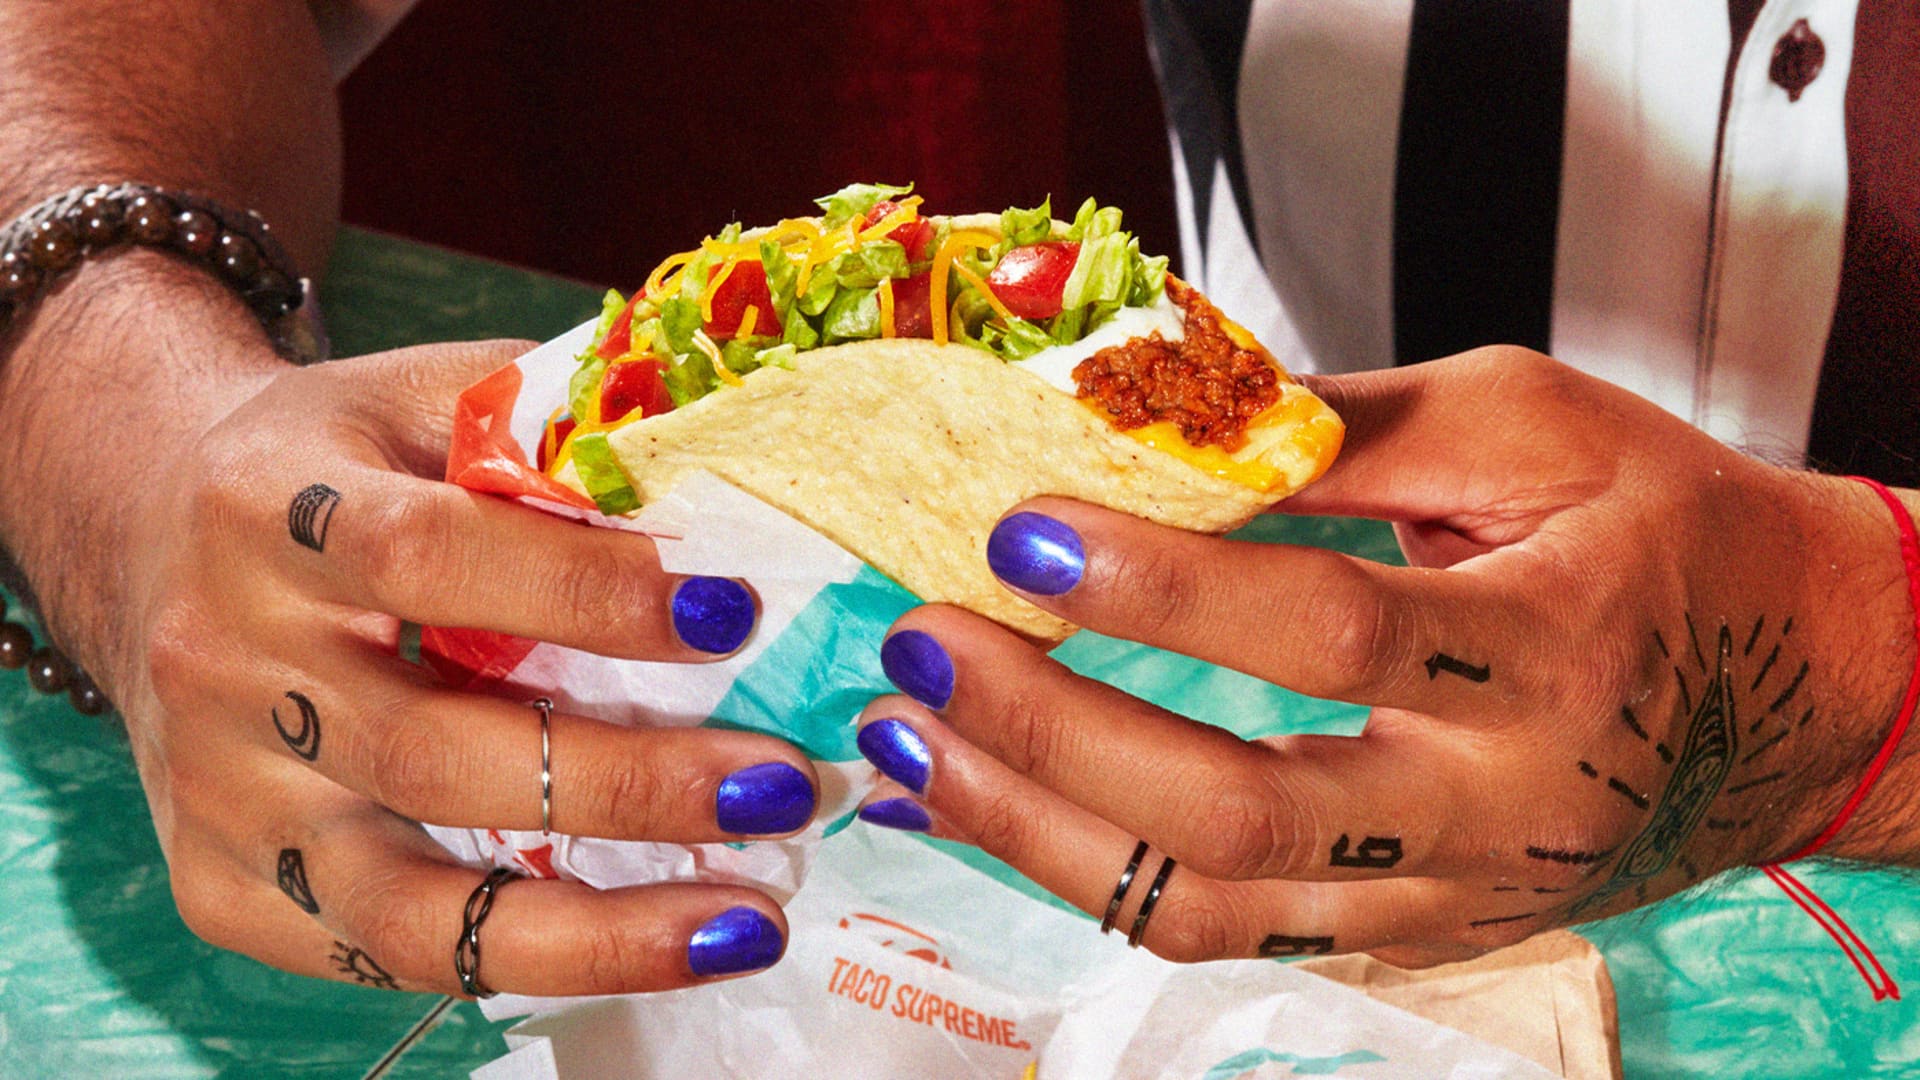 Taco Bell tests its own meat substitute ahead of Beyond Meat launch later this year